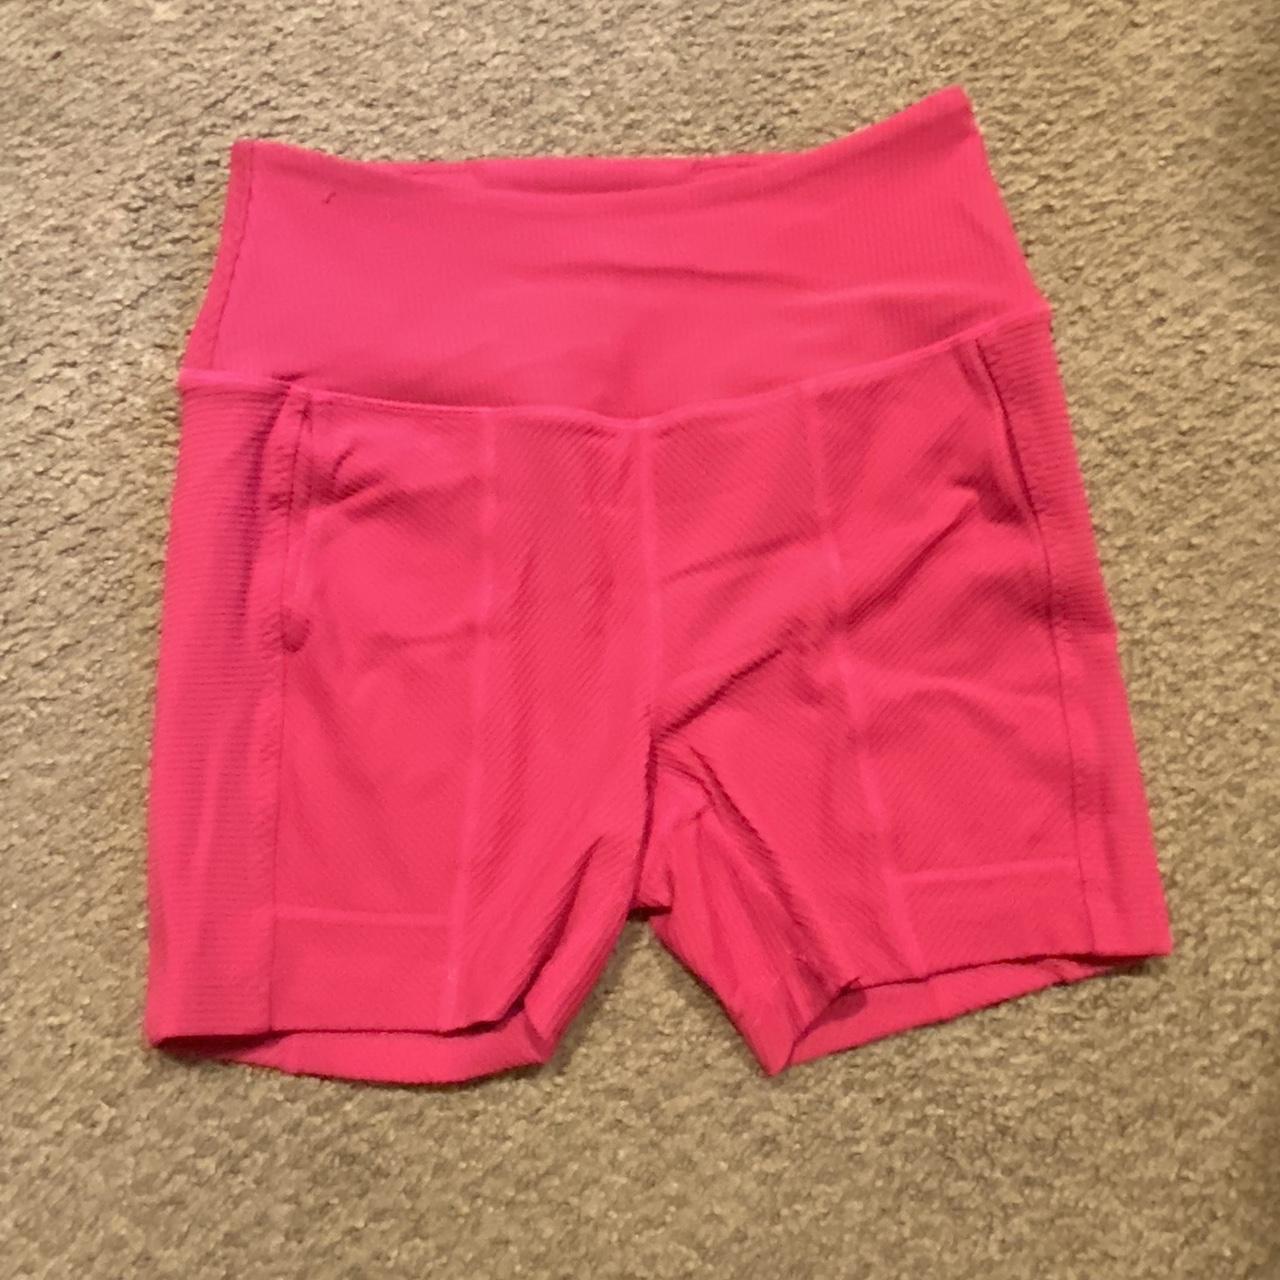 FP movement pink shorts size small - Depop